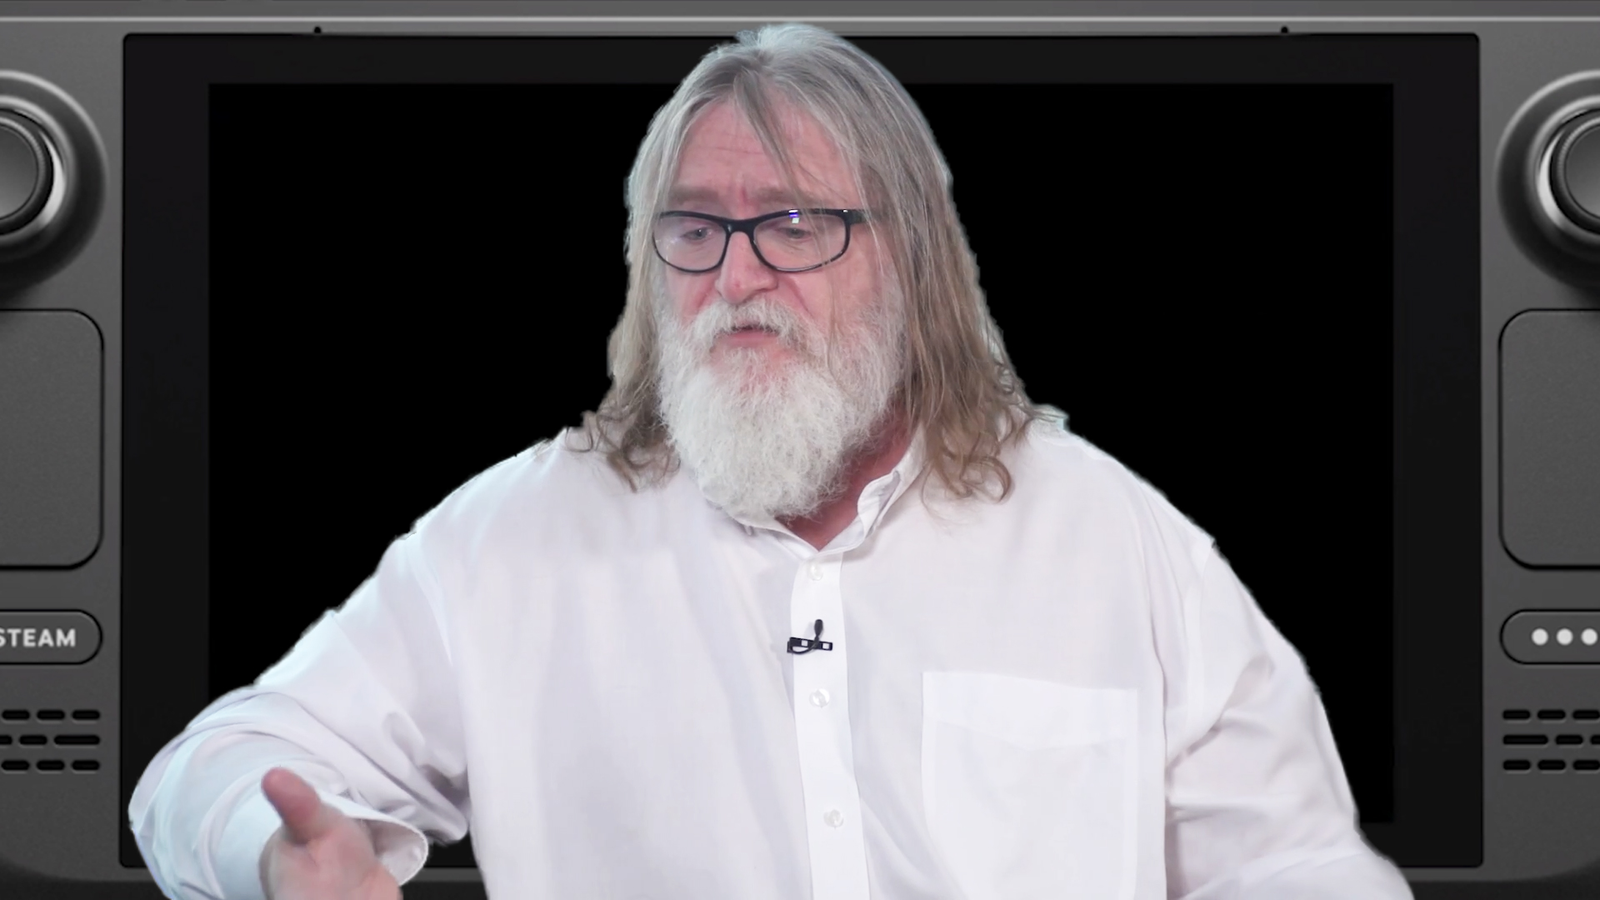 Gabe Newell made Windows a viable gaming platform, and Linux is next